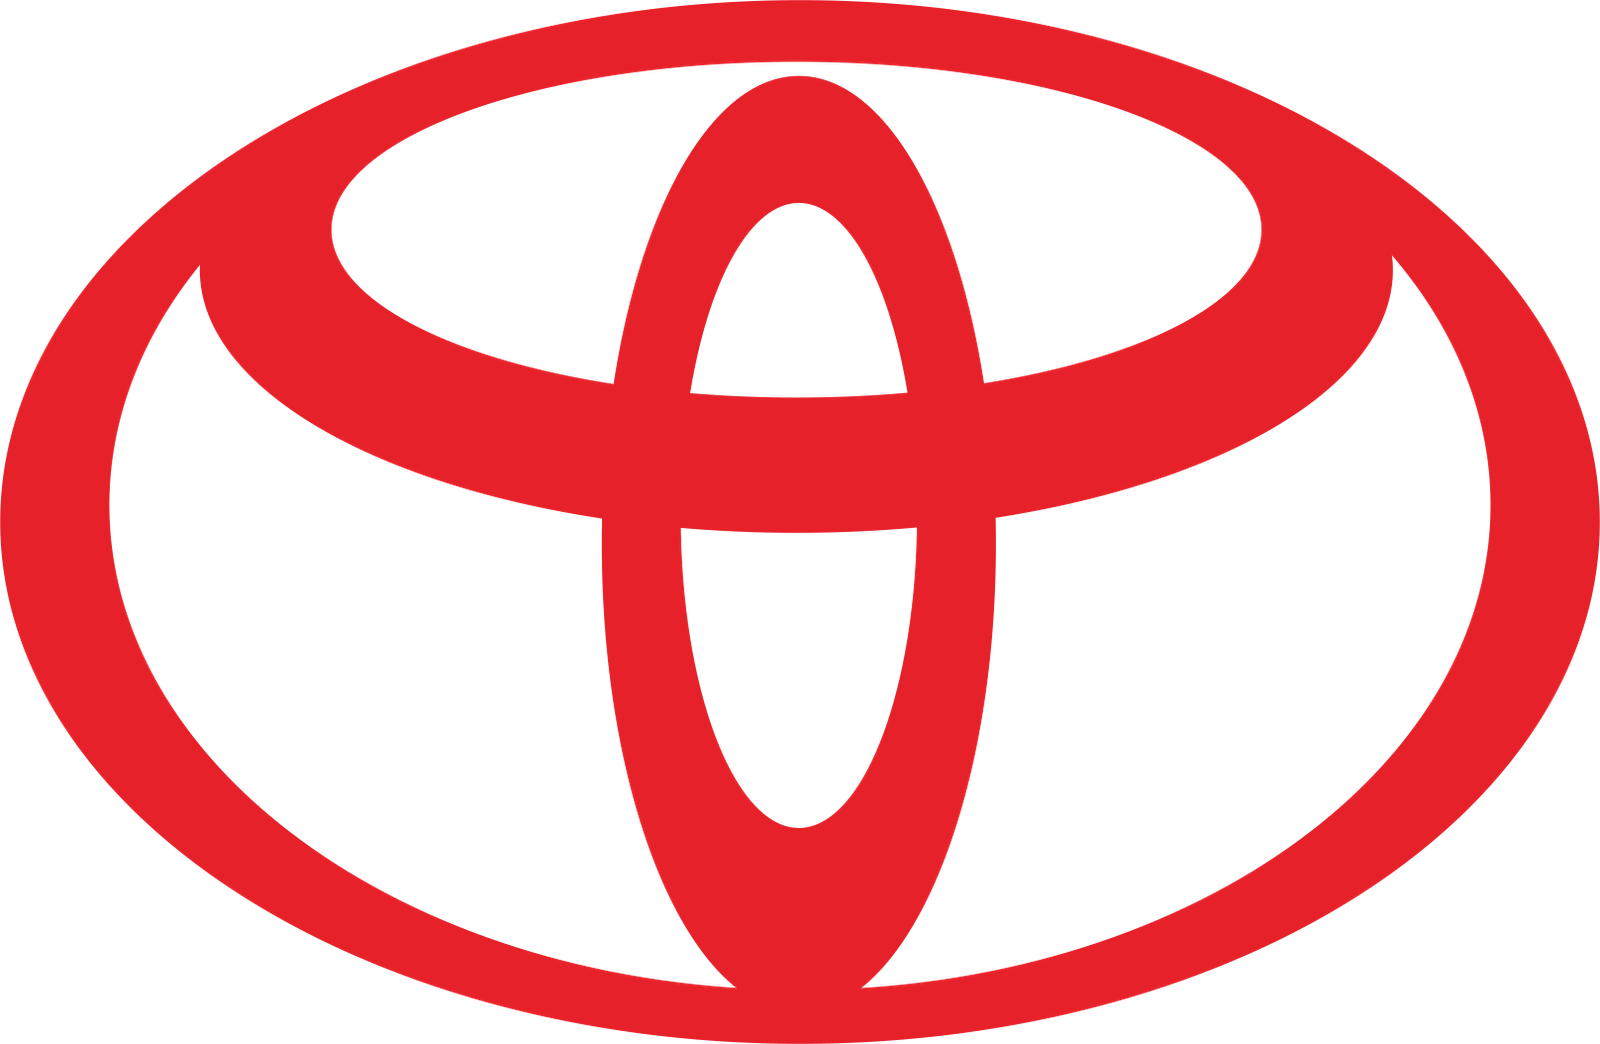 Toyota Logo PNG Transparent Images PNG All